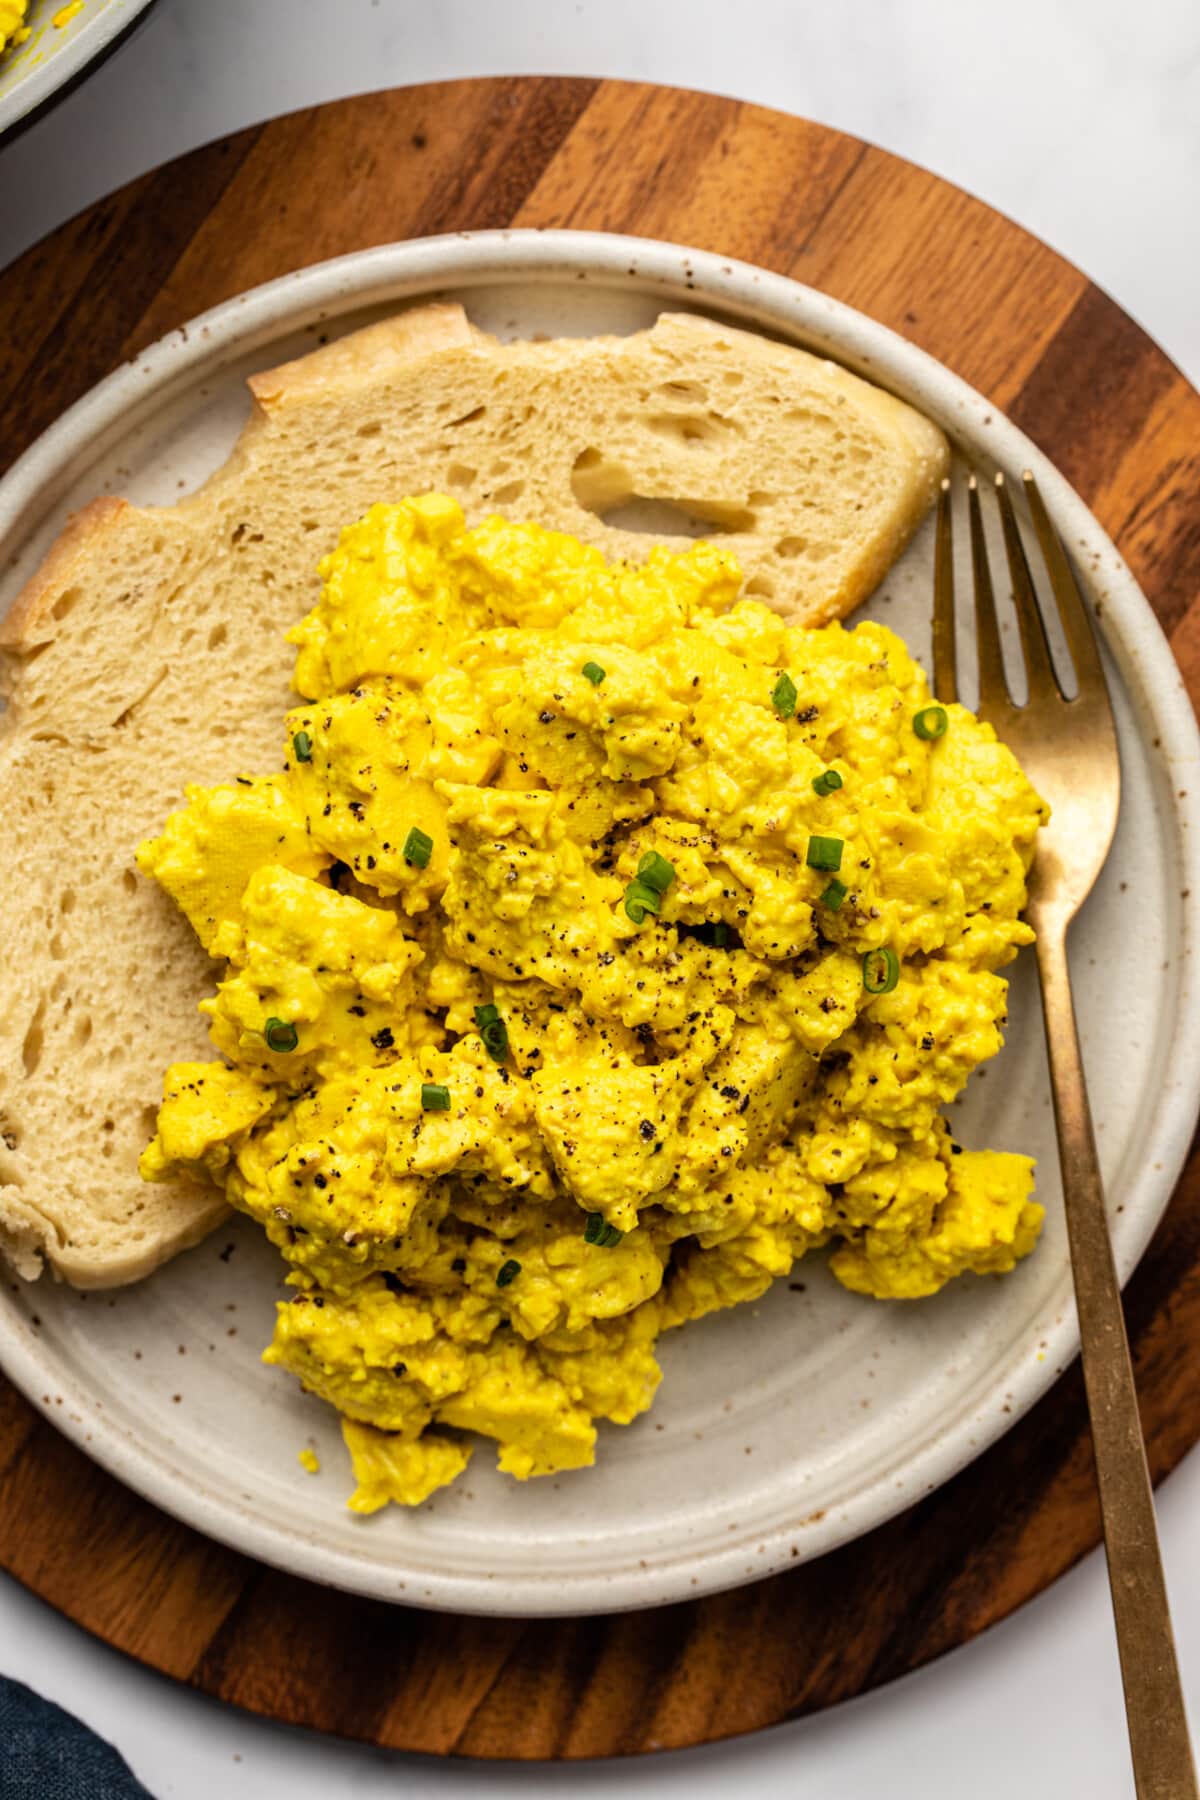 tofu scramble served on a plate with a slice of bread on the side, topped with chives and more seasoning